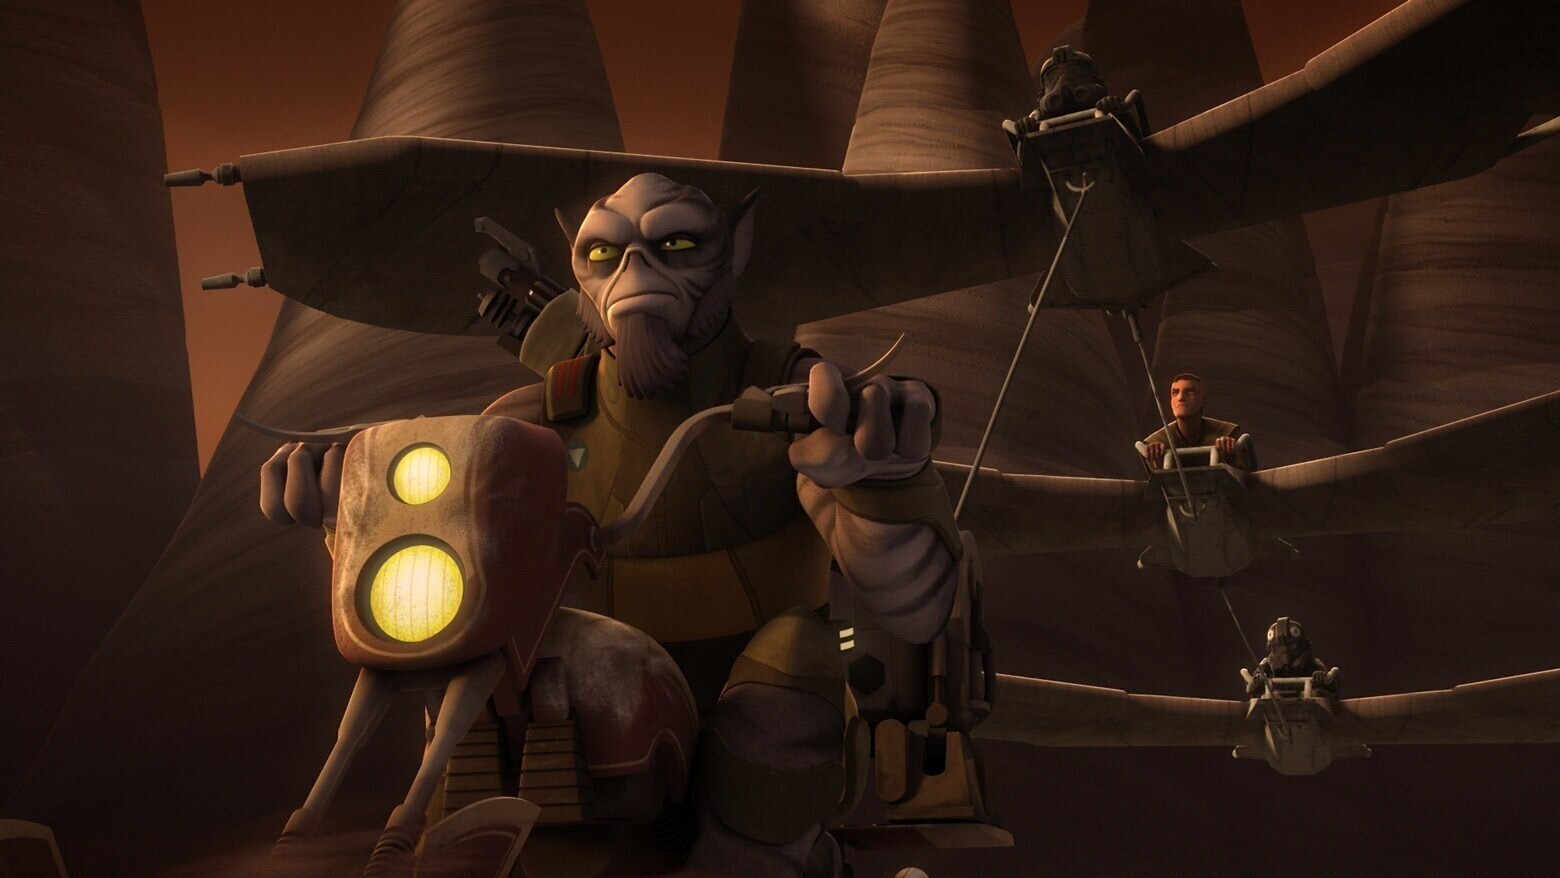 Zeb riding on a speeder with Sabine, Ezra and Kanan on gliders behind him